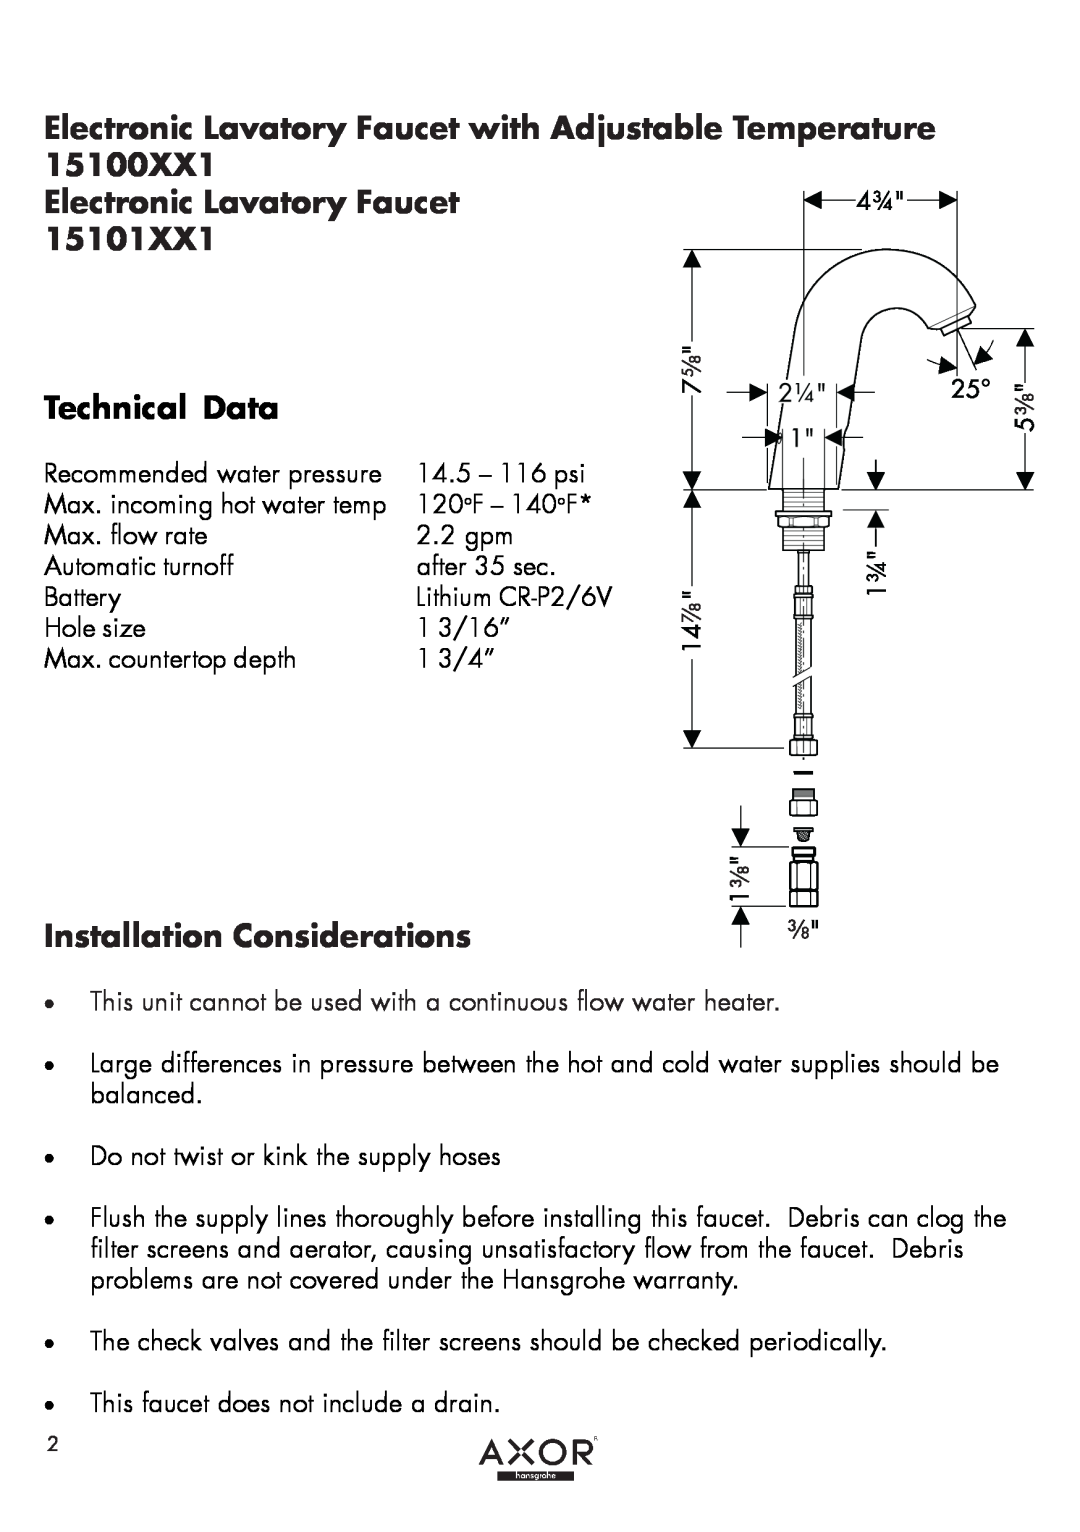 Axor 15100XX1, 15101XX1 installation instructions Electronic Lavatory Faucet, Installation Considerations, Technical Data 